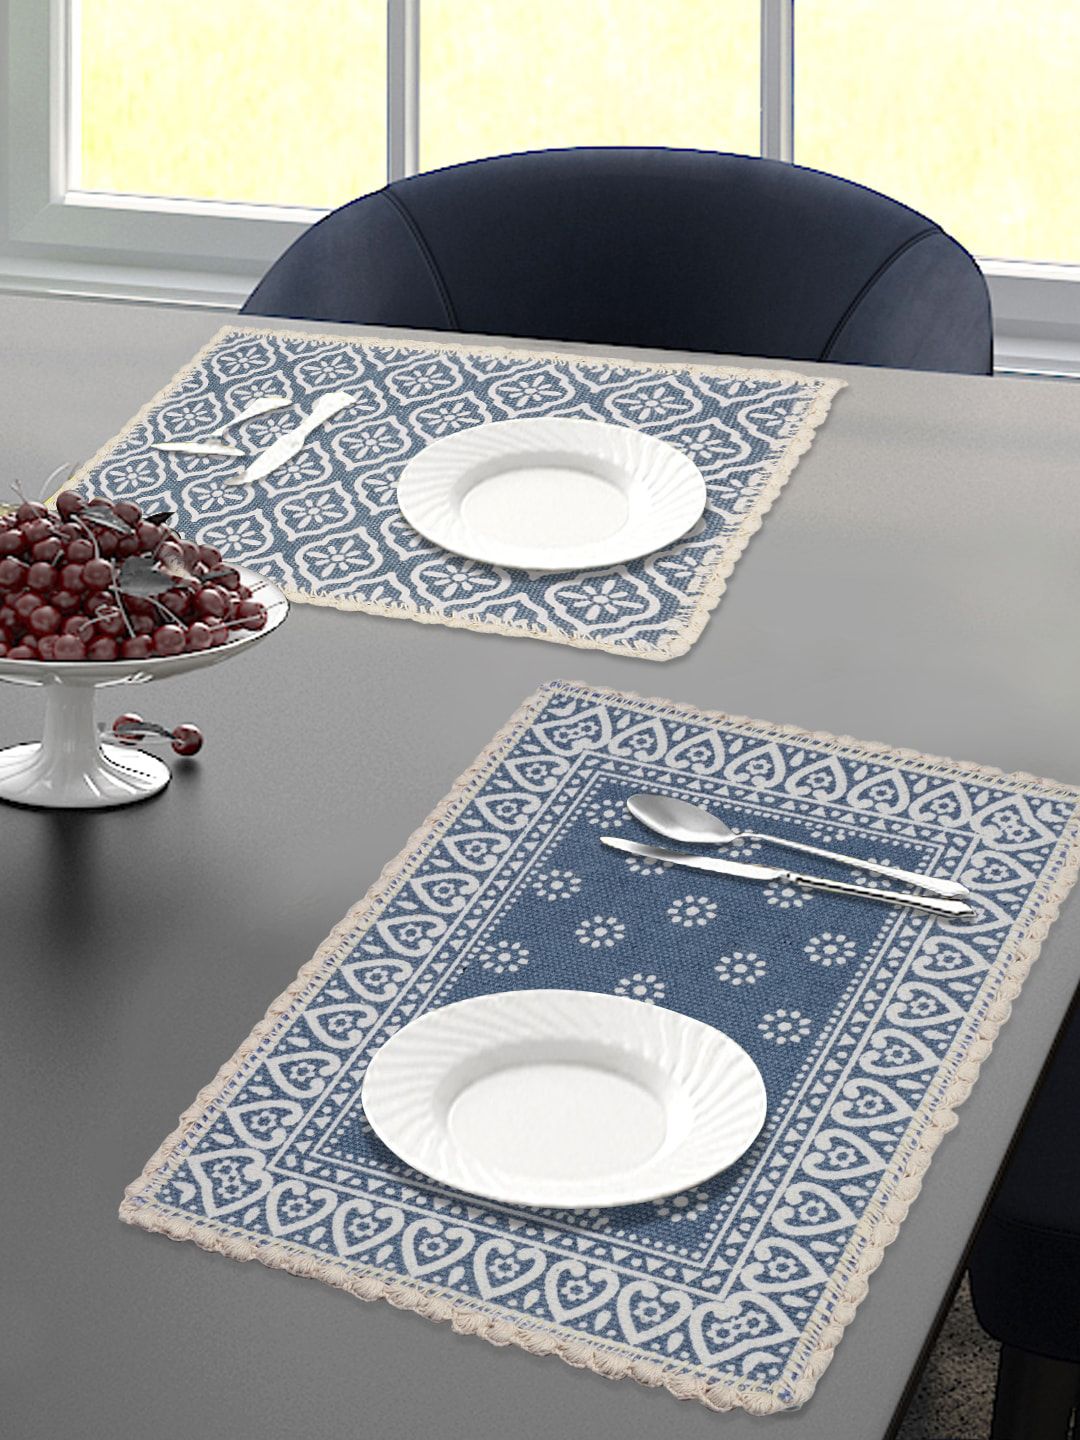 Saral Home Set Of 2 Printed Table Placemats Price in India